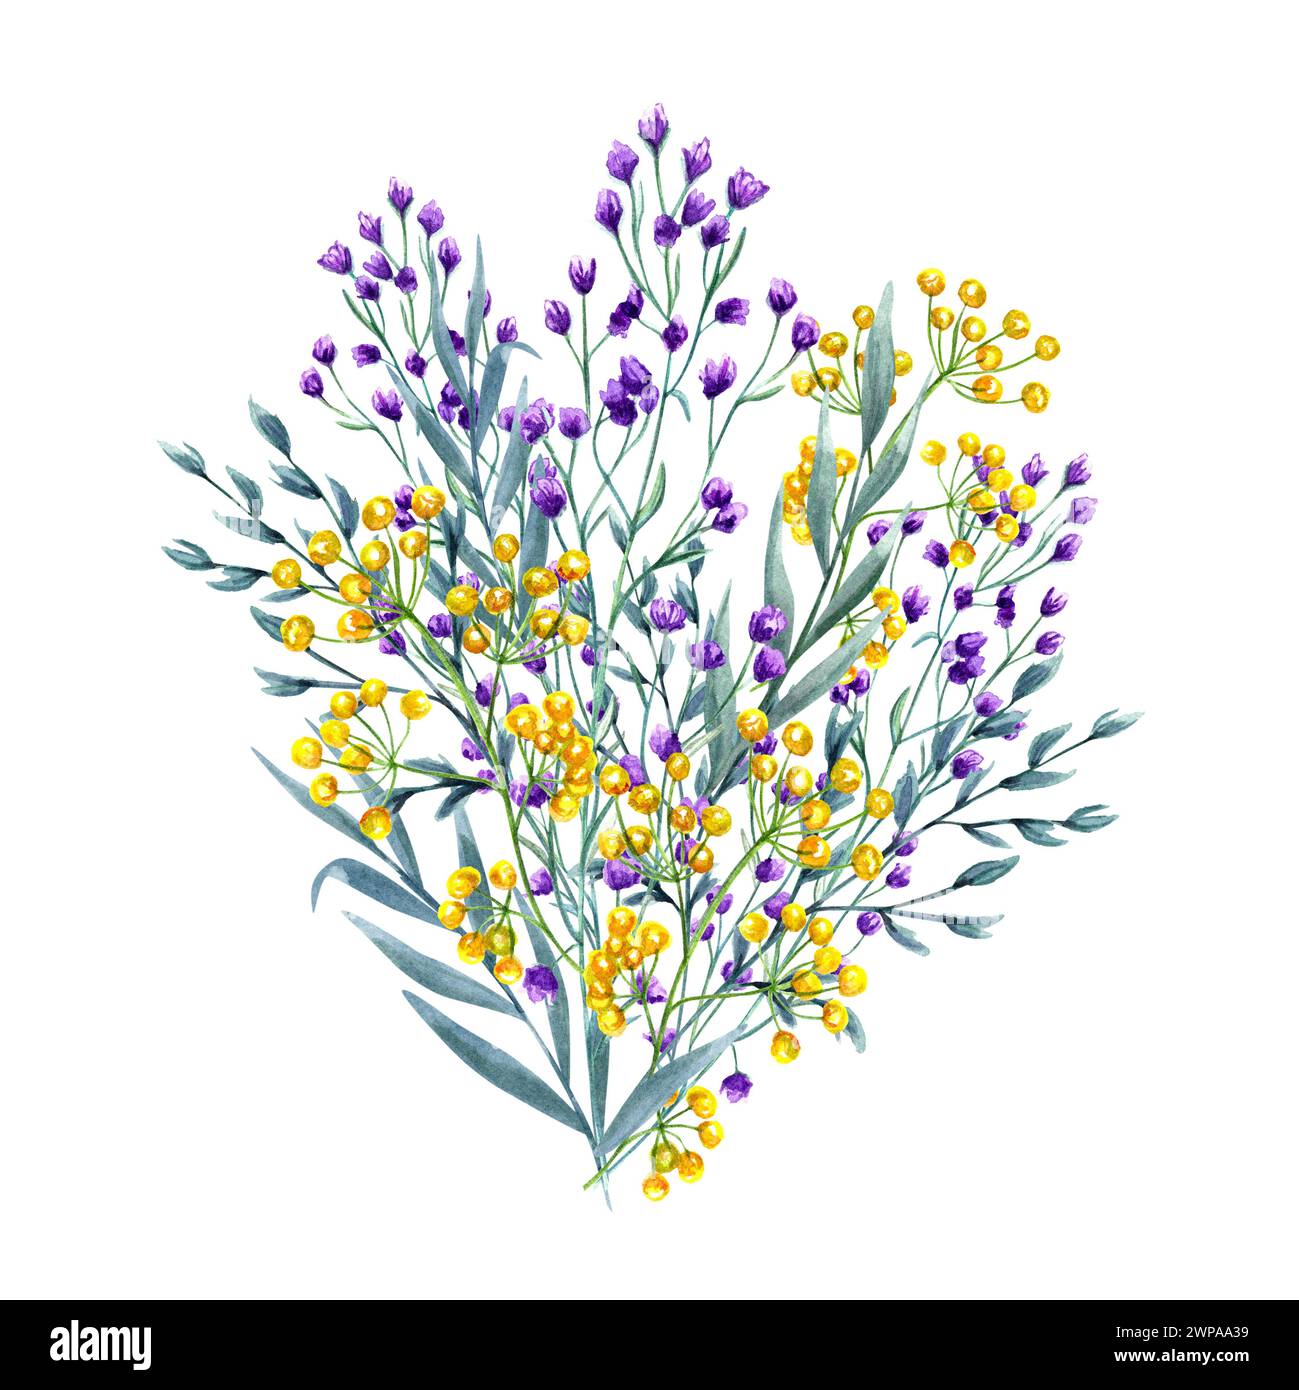 Bouquet of yellow, purple flowers and spikelet. Spring, summer green herbs. Meadow plants. Blooming wildflowers. Watercolor illustration for wedding Stock Photo